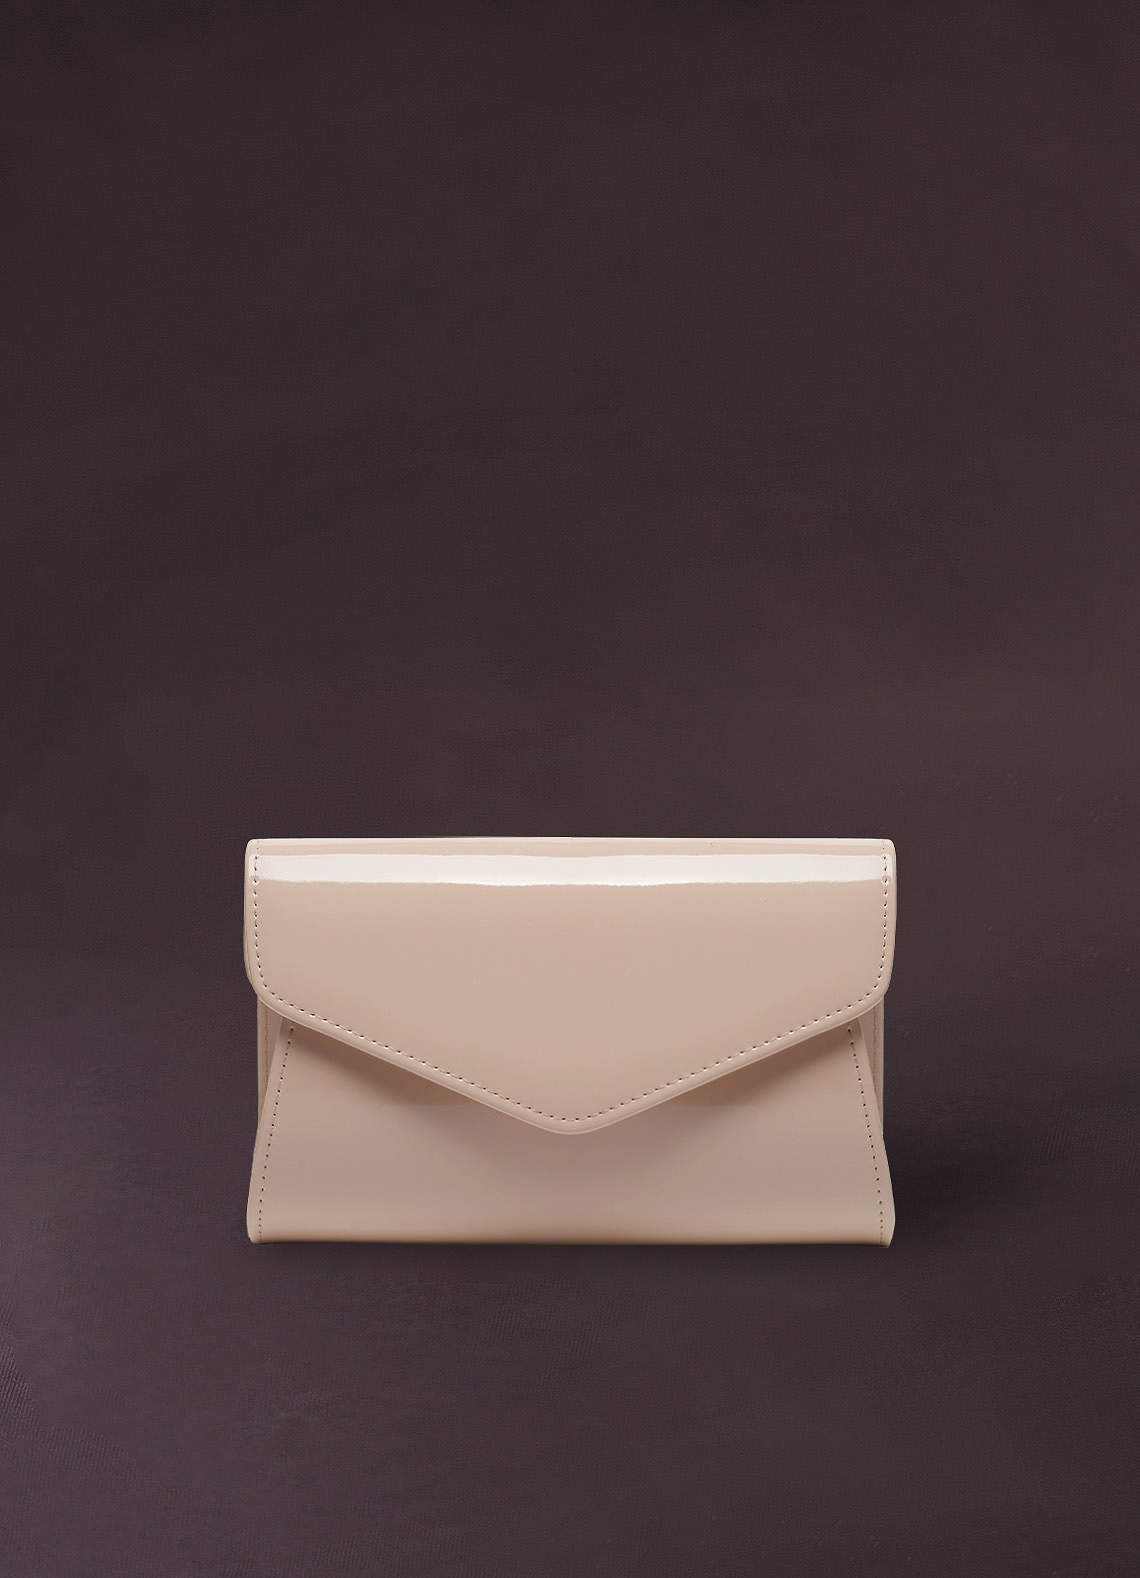 Nude Leather Clutch Bag / Nude Envelope Clutch / Leather Bag 